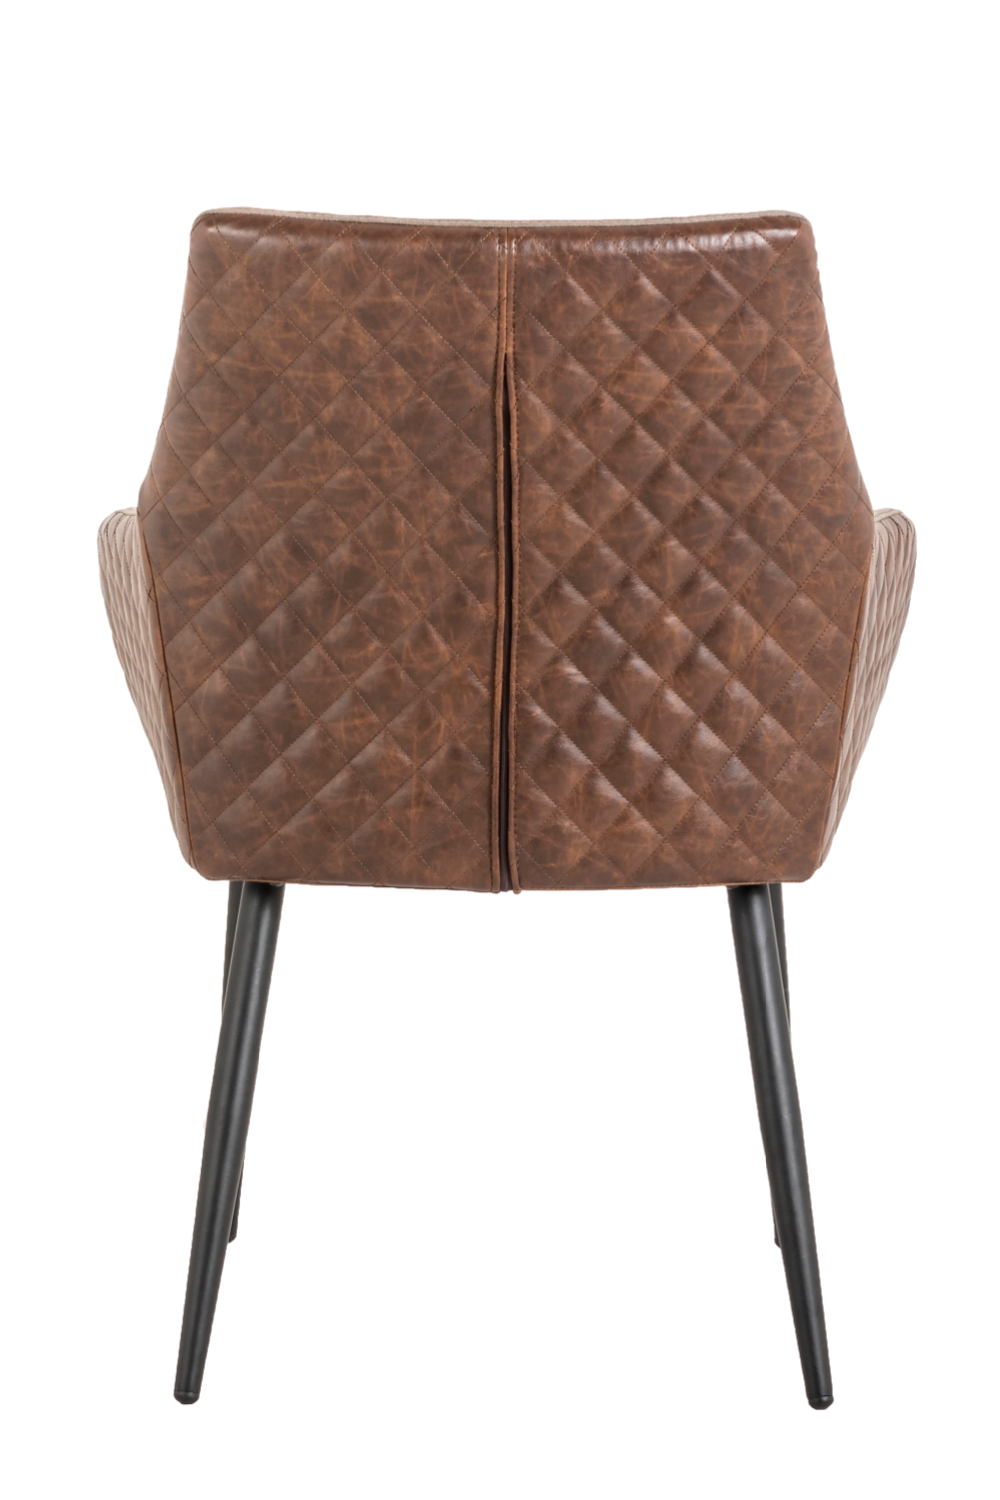 Brown Leather Dining Chair | OROA Chrissy | OROA.com